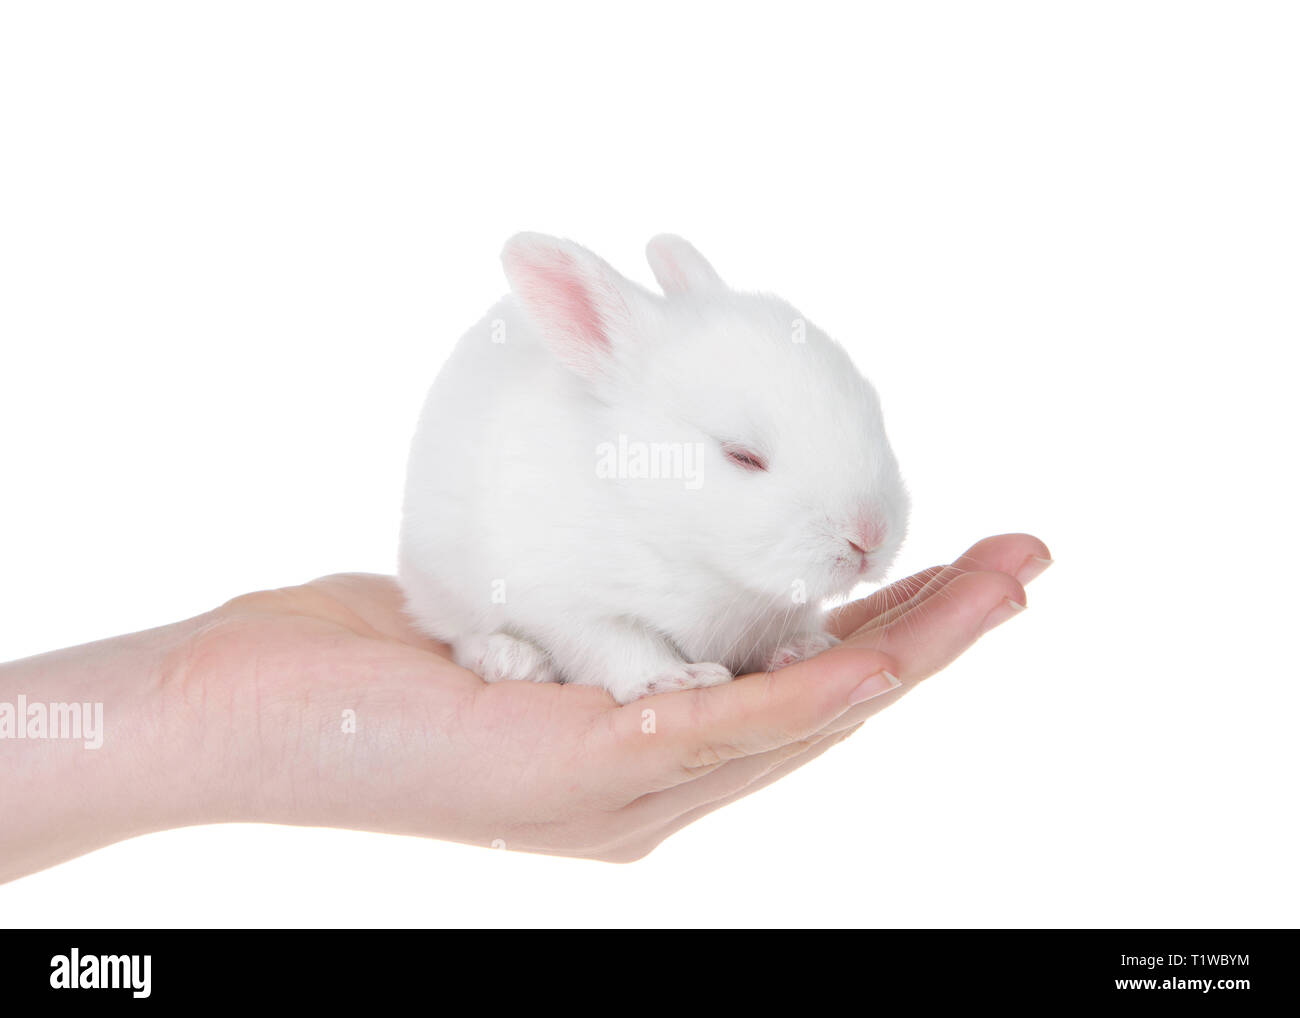 Young caucasian hand holding albino white baby bunny, tired, sleeping. Isolated on white. Stock Photo